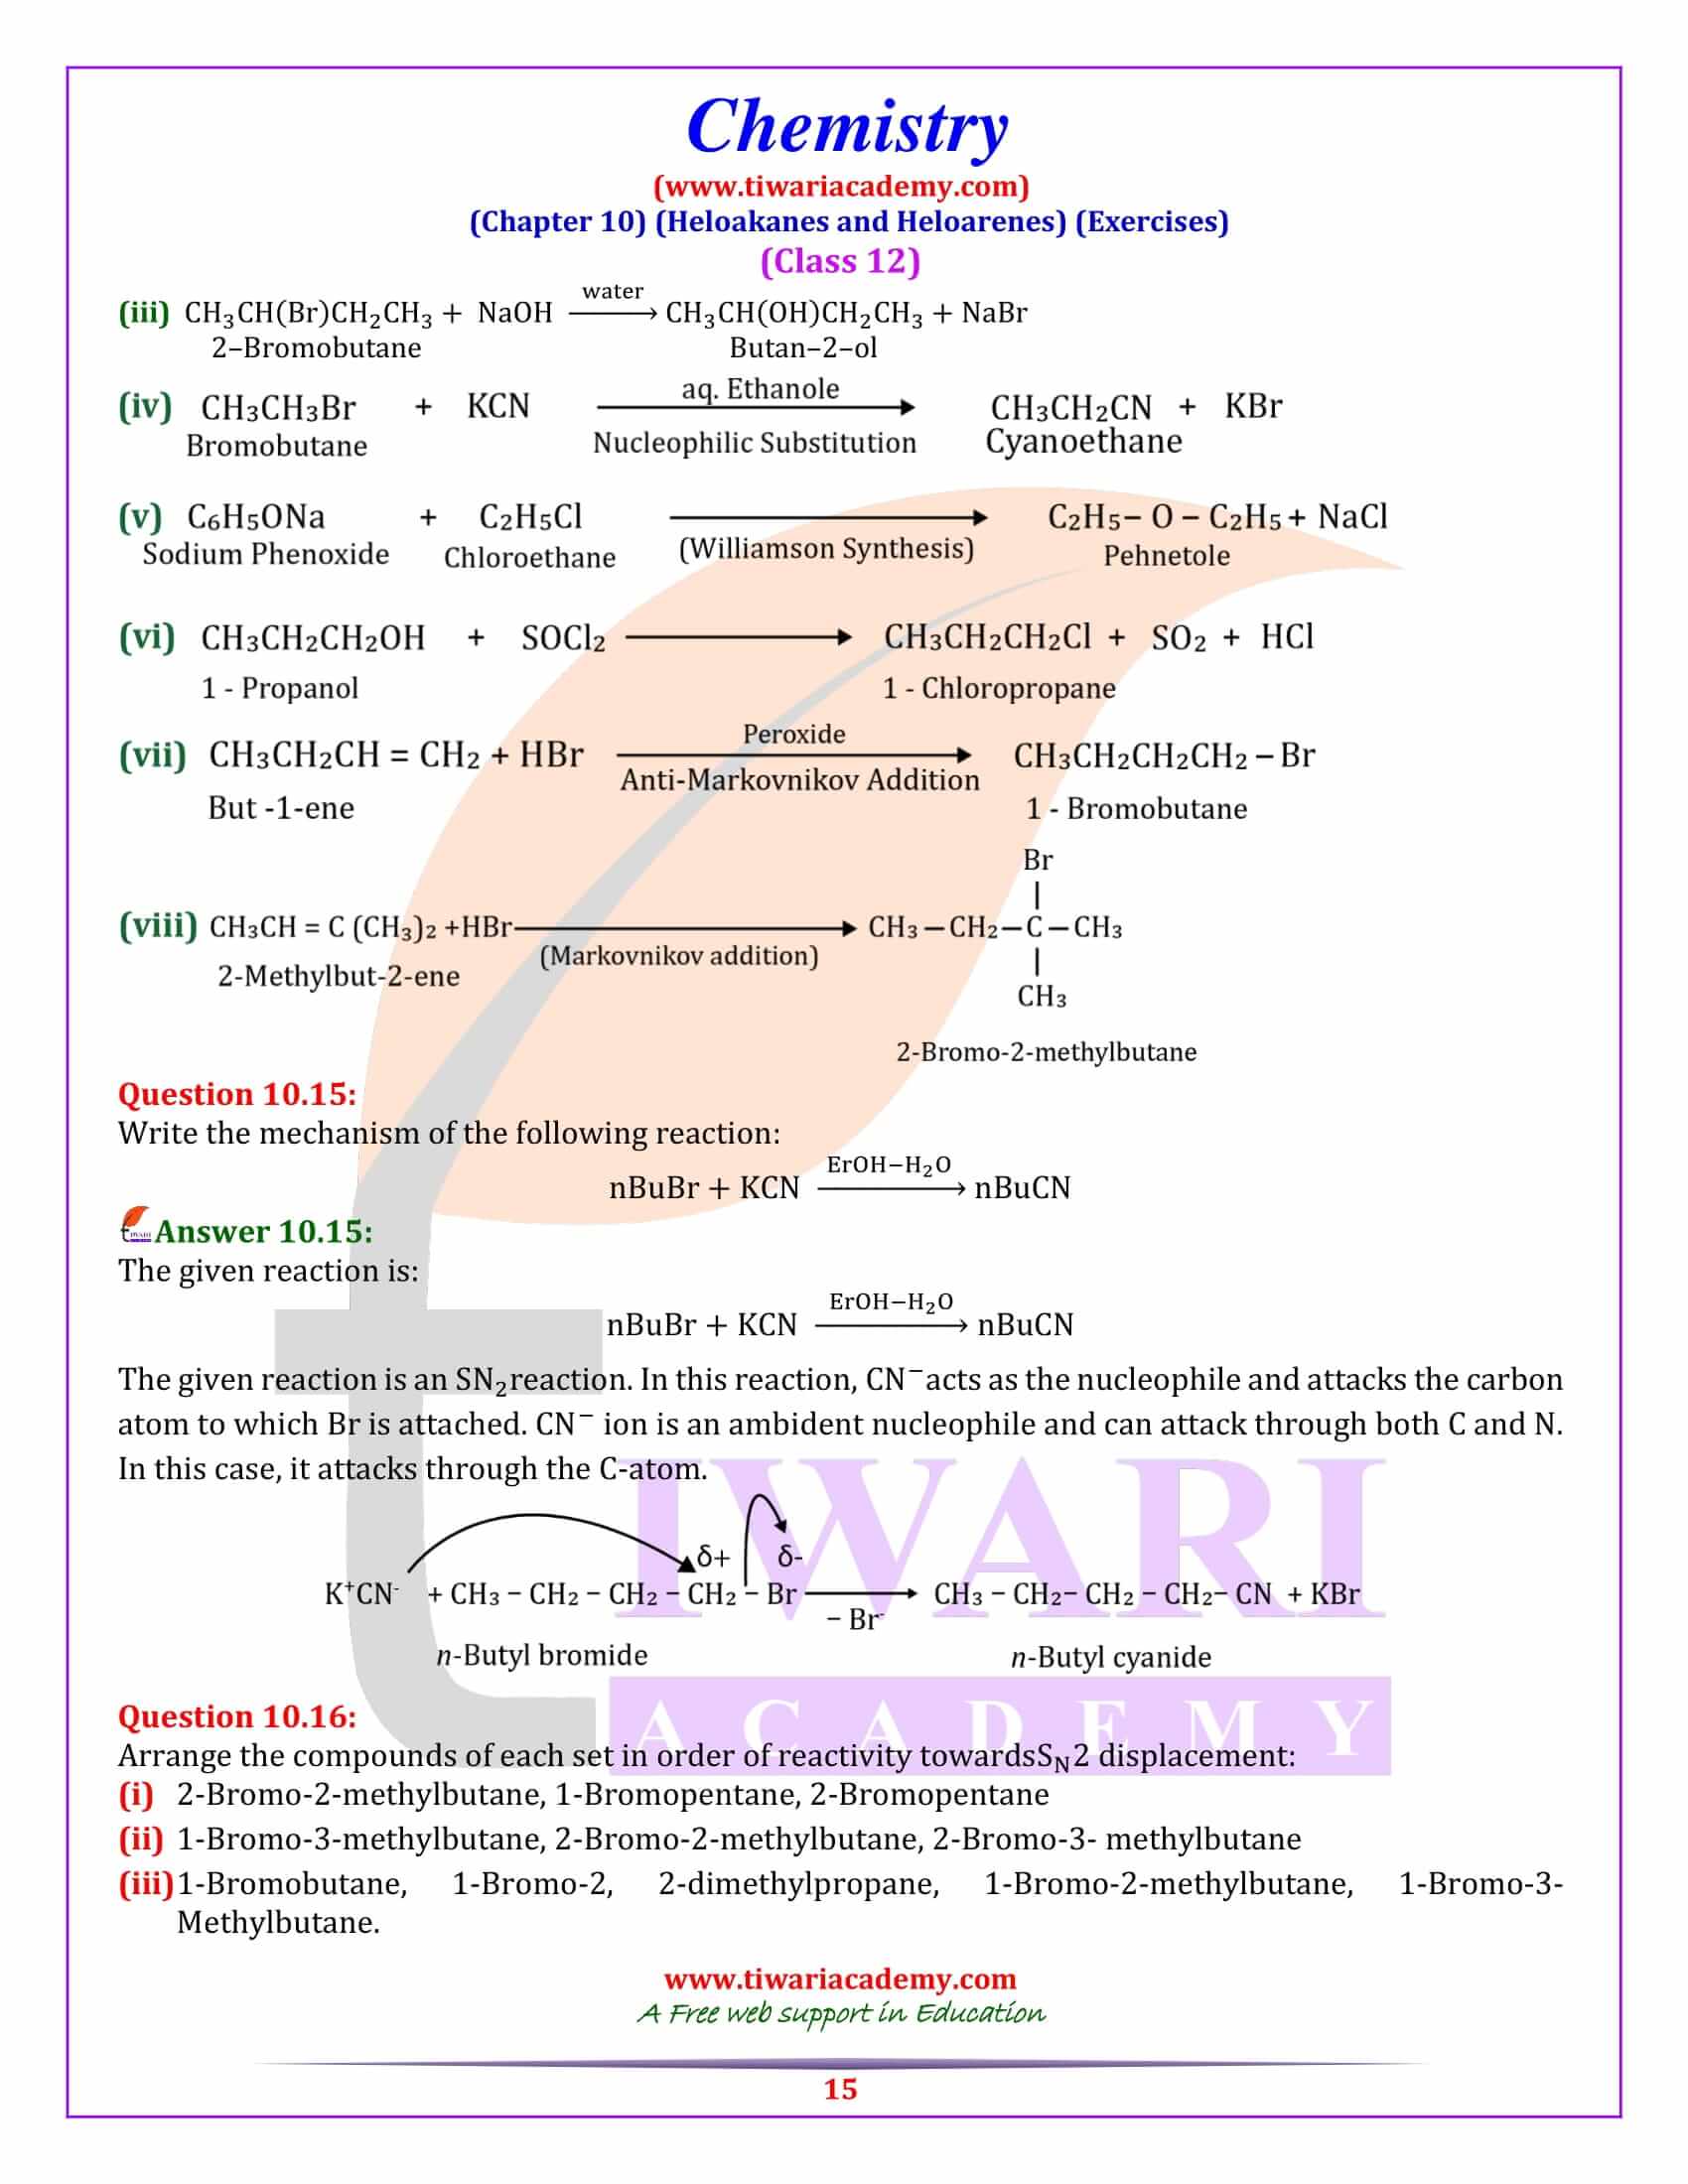 NCERT Solutions for Class 12 Chemistry Chapter 10 Free to use